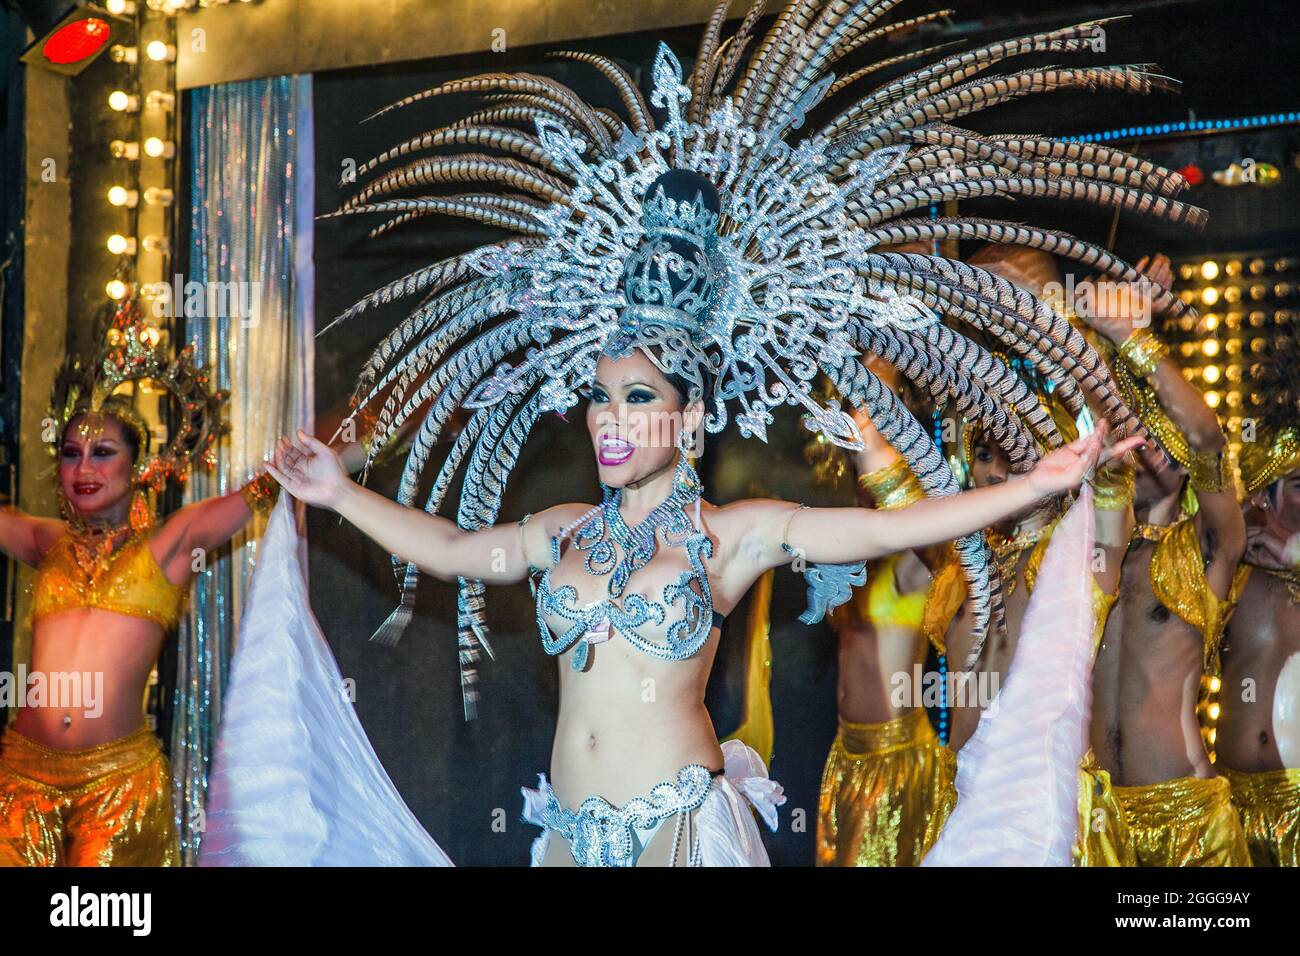 Thai ladyboy dressed in sparkly costume exposing silicon breasts with flamboyant headdress performing cabaret numbers on stage, Phuket, Thailand Stock Photo